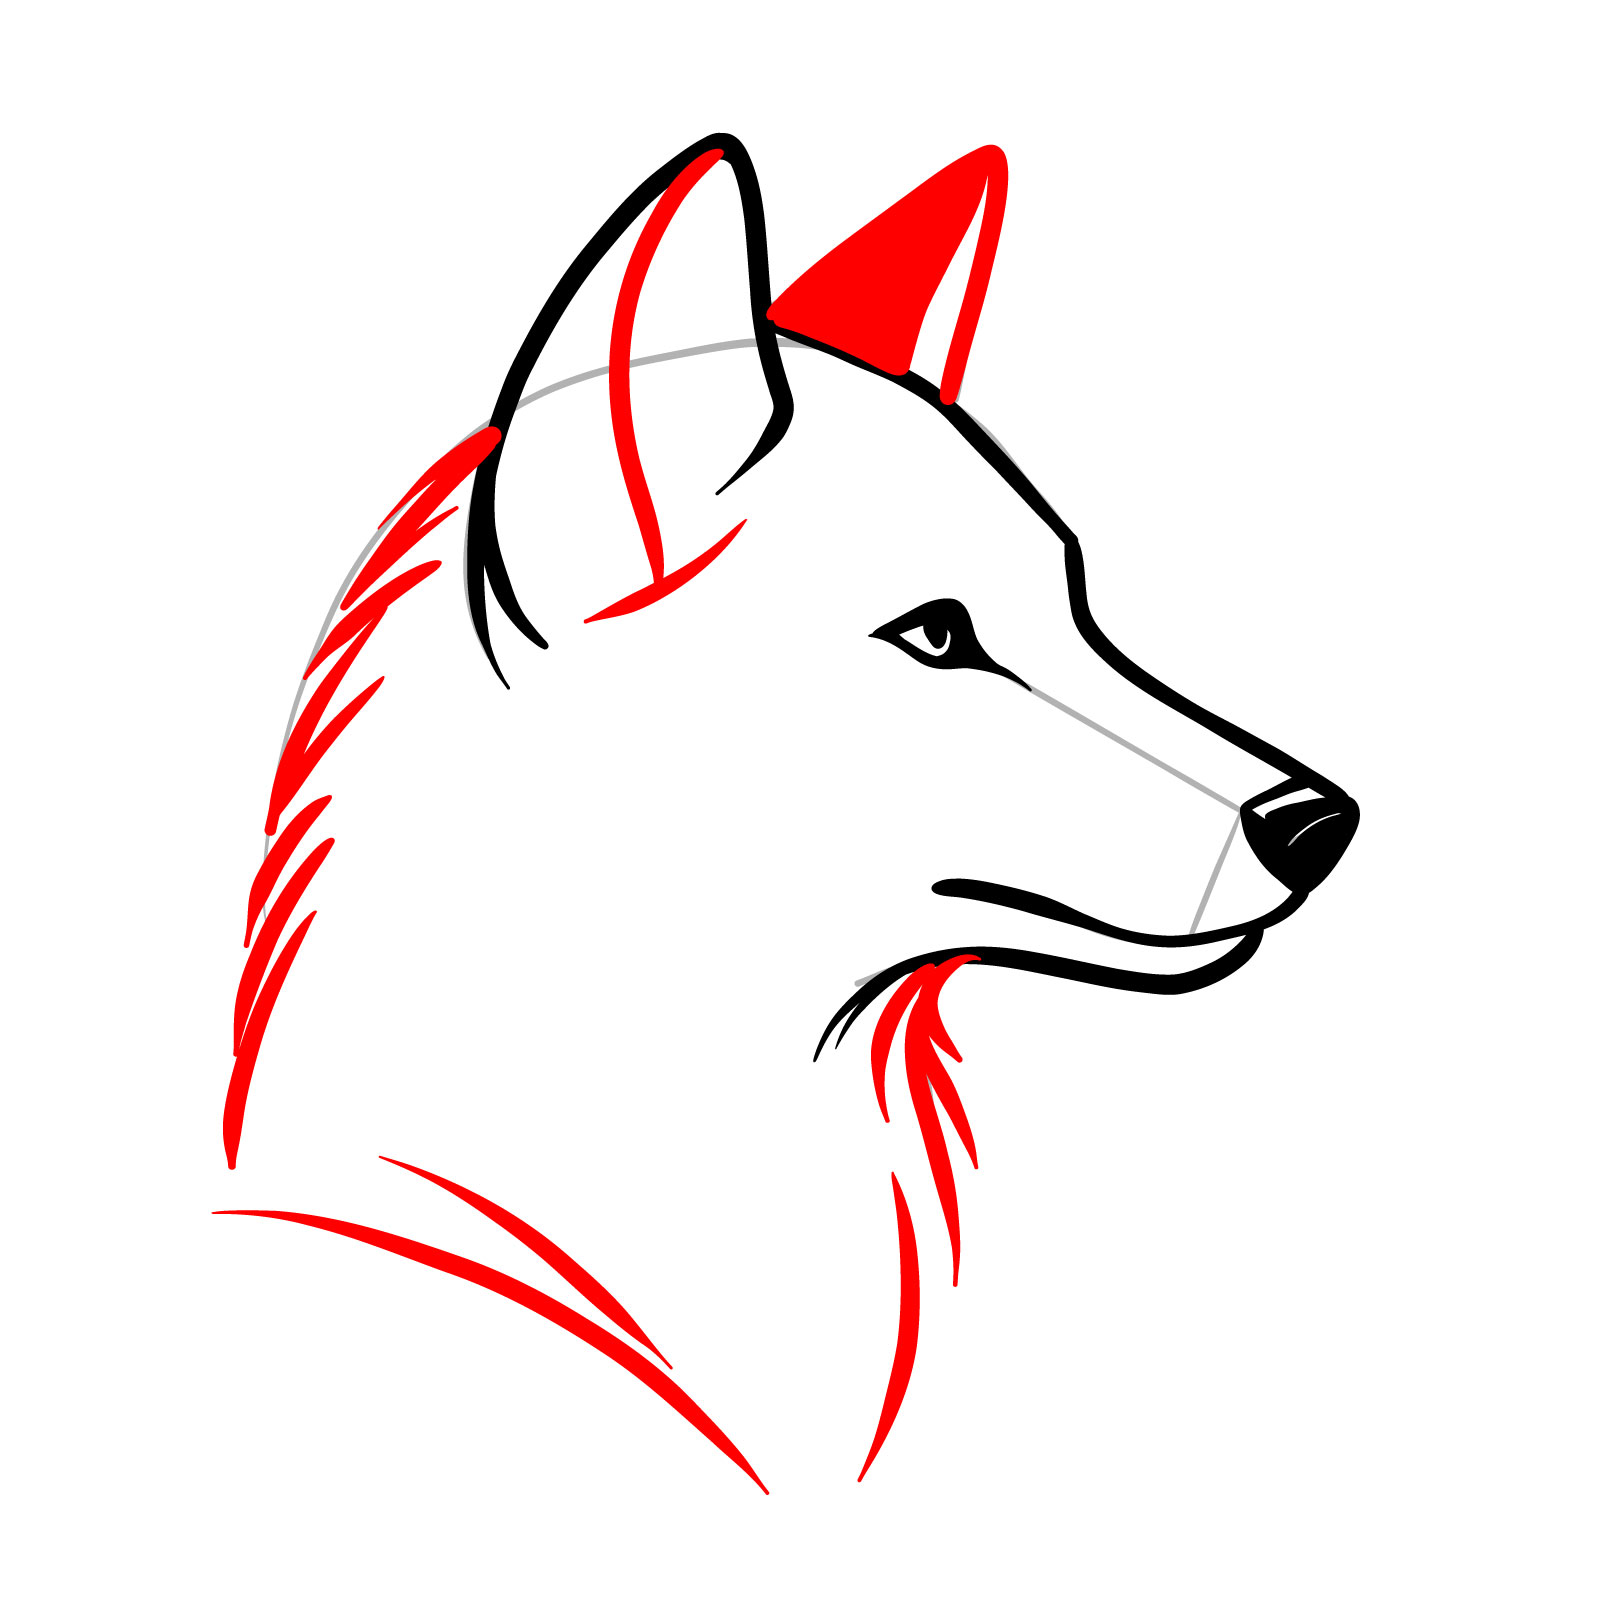 Detailing the second ear and refining the wolf's head outline in a drawing - step 08